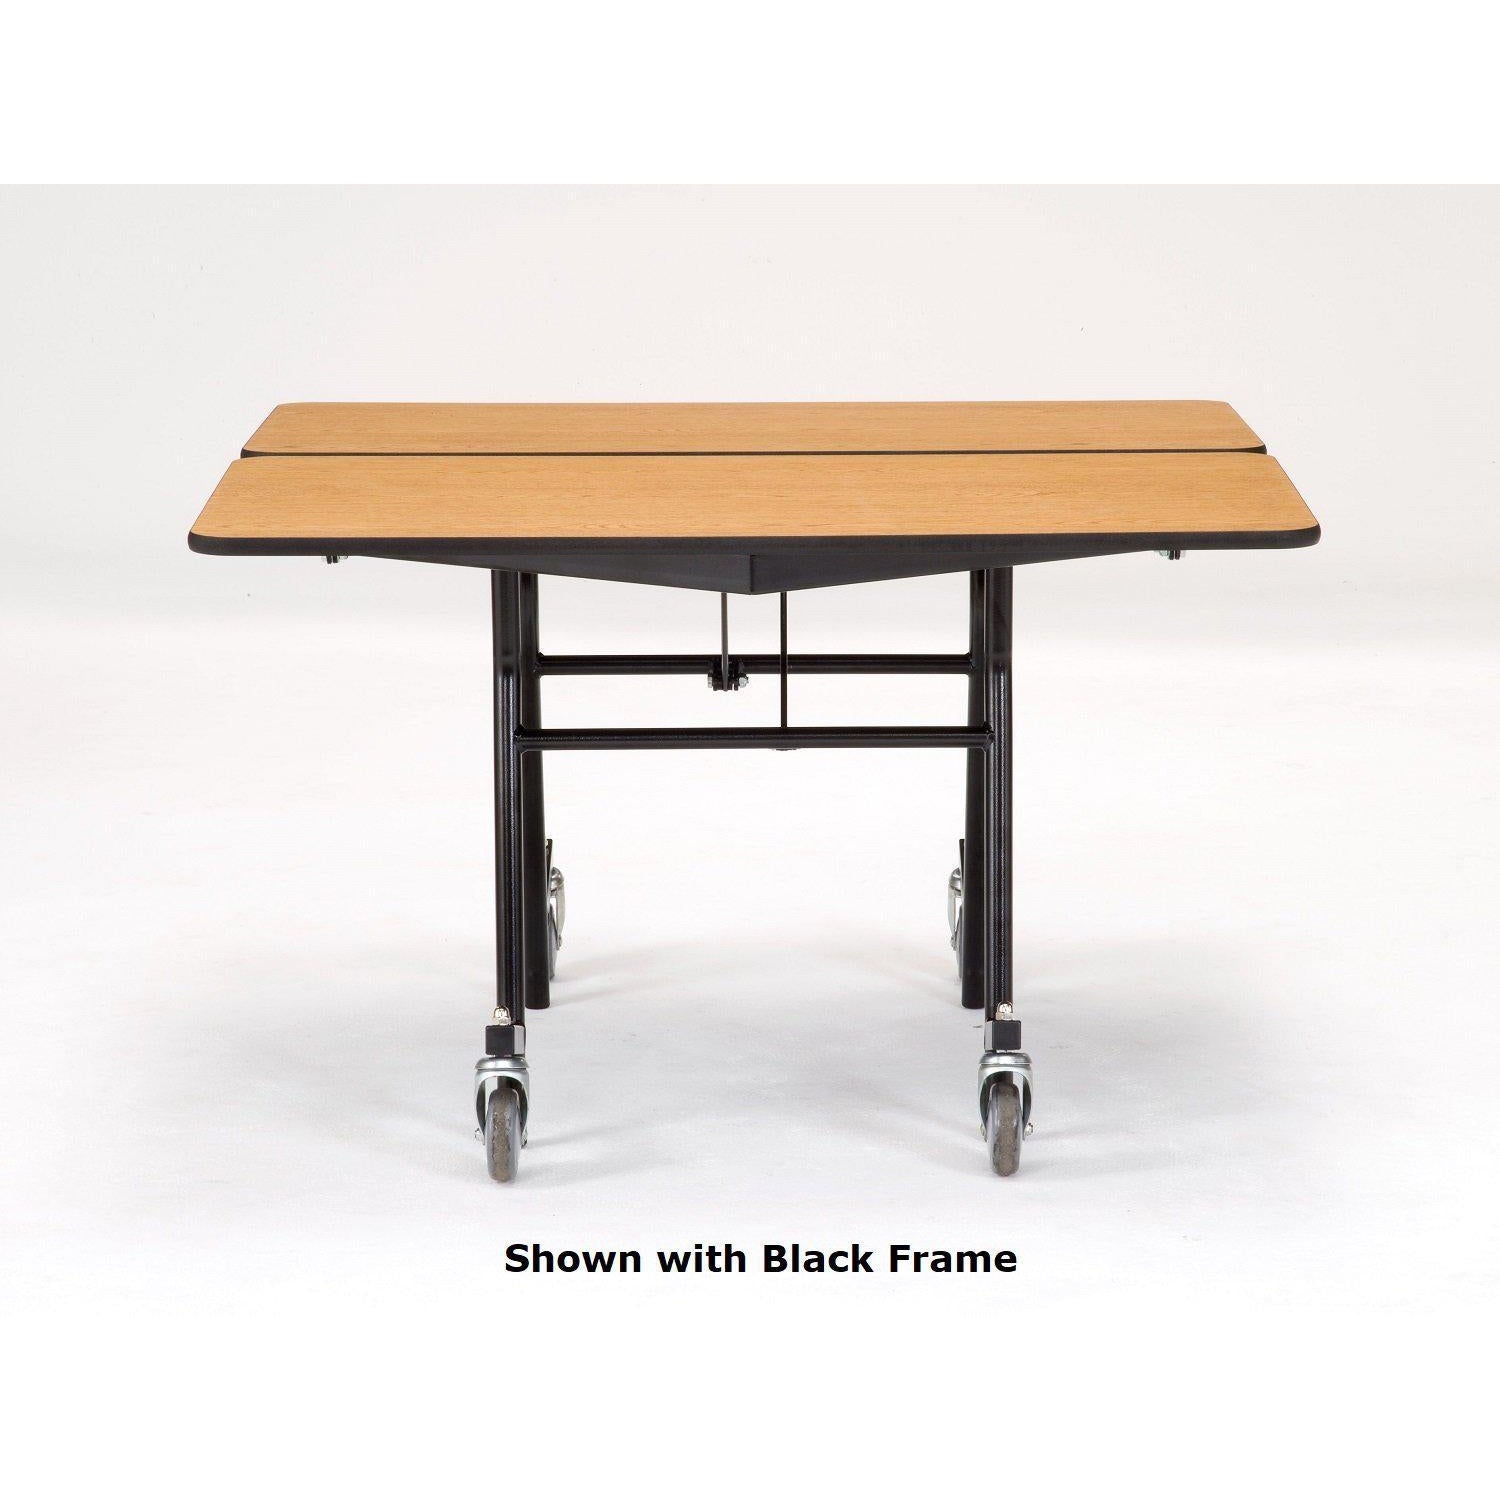 Mobile Shape Cafeteria Table, 60" Square, Particleboard Core, Vinyl T-Mold Edge, Textured Black Frame